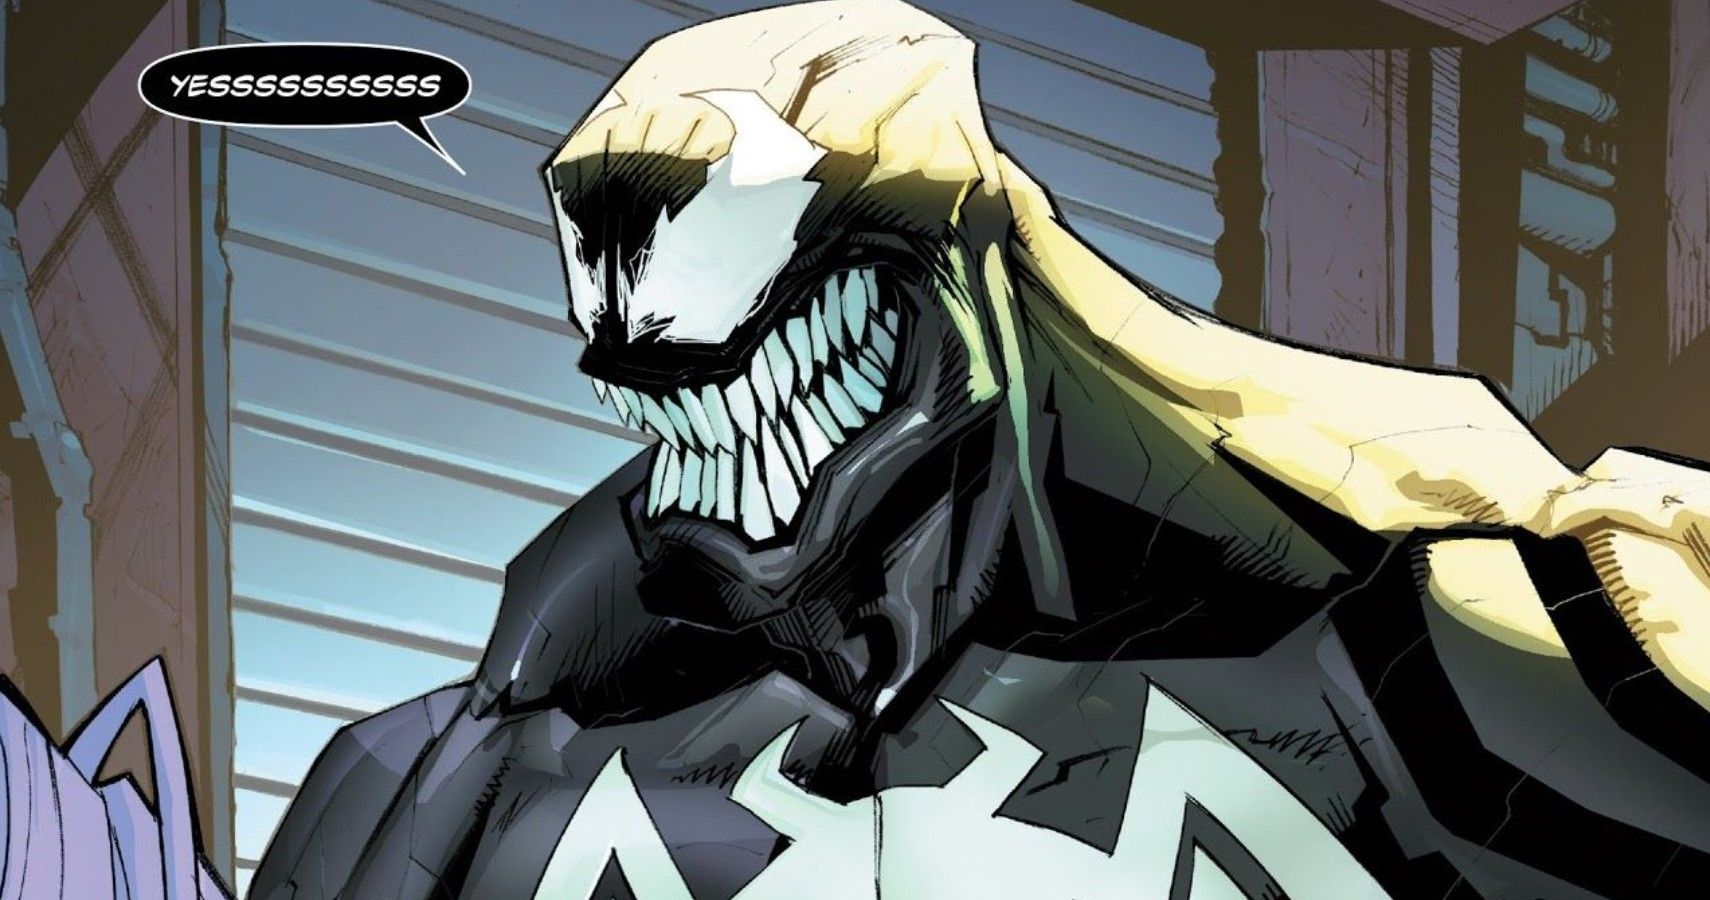 Venom': Everything You Need to Know About the Marvel Antihero